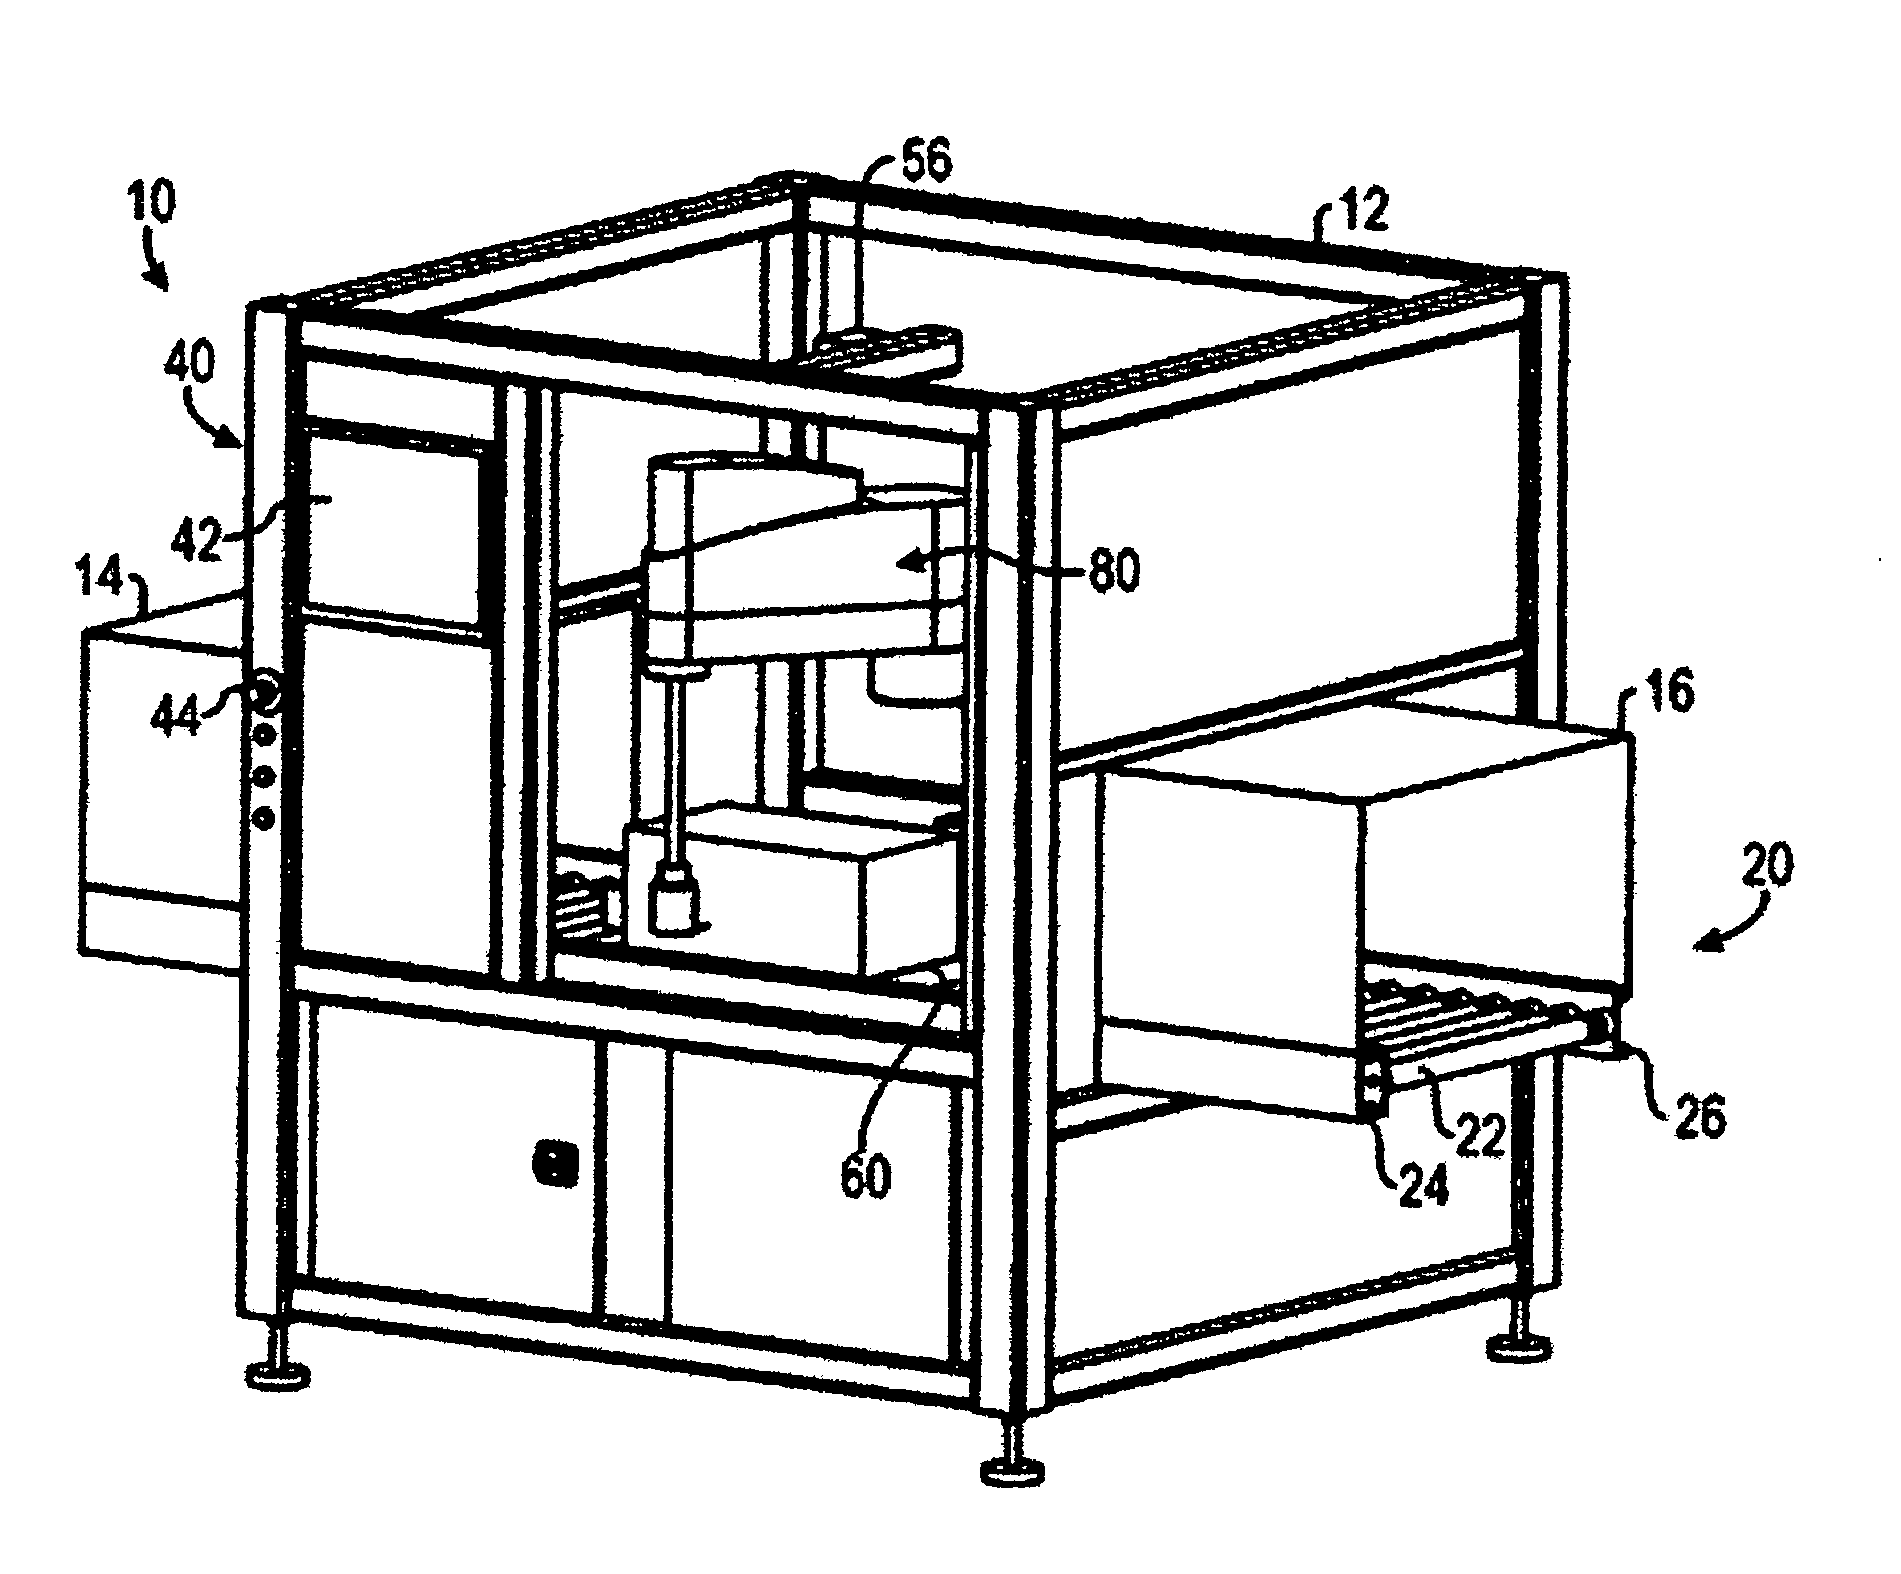 Automated Box Opening Apparatus